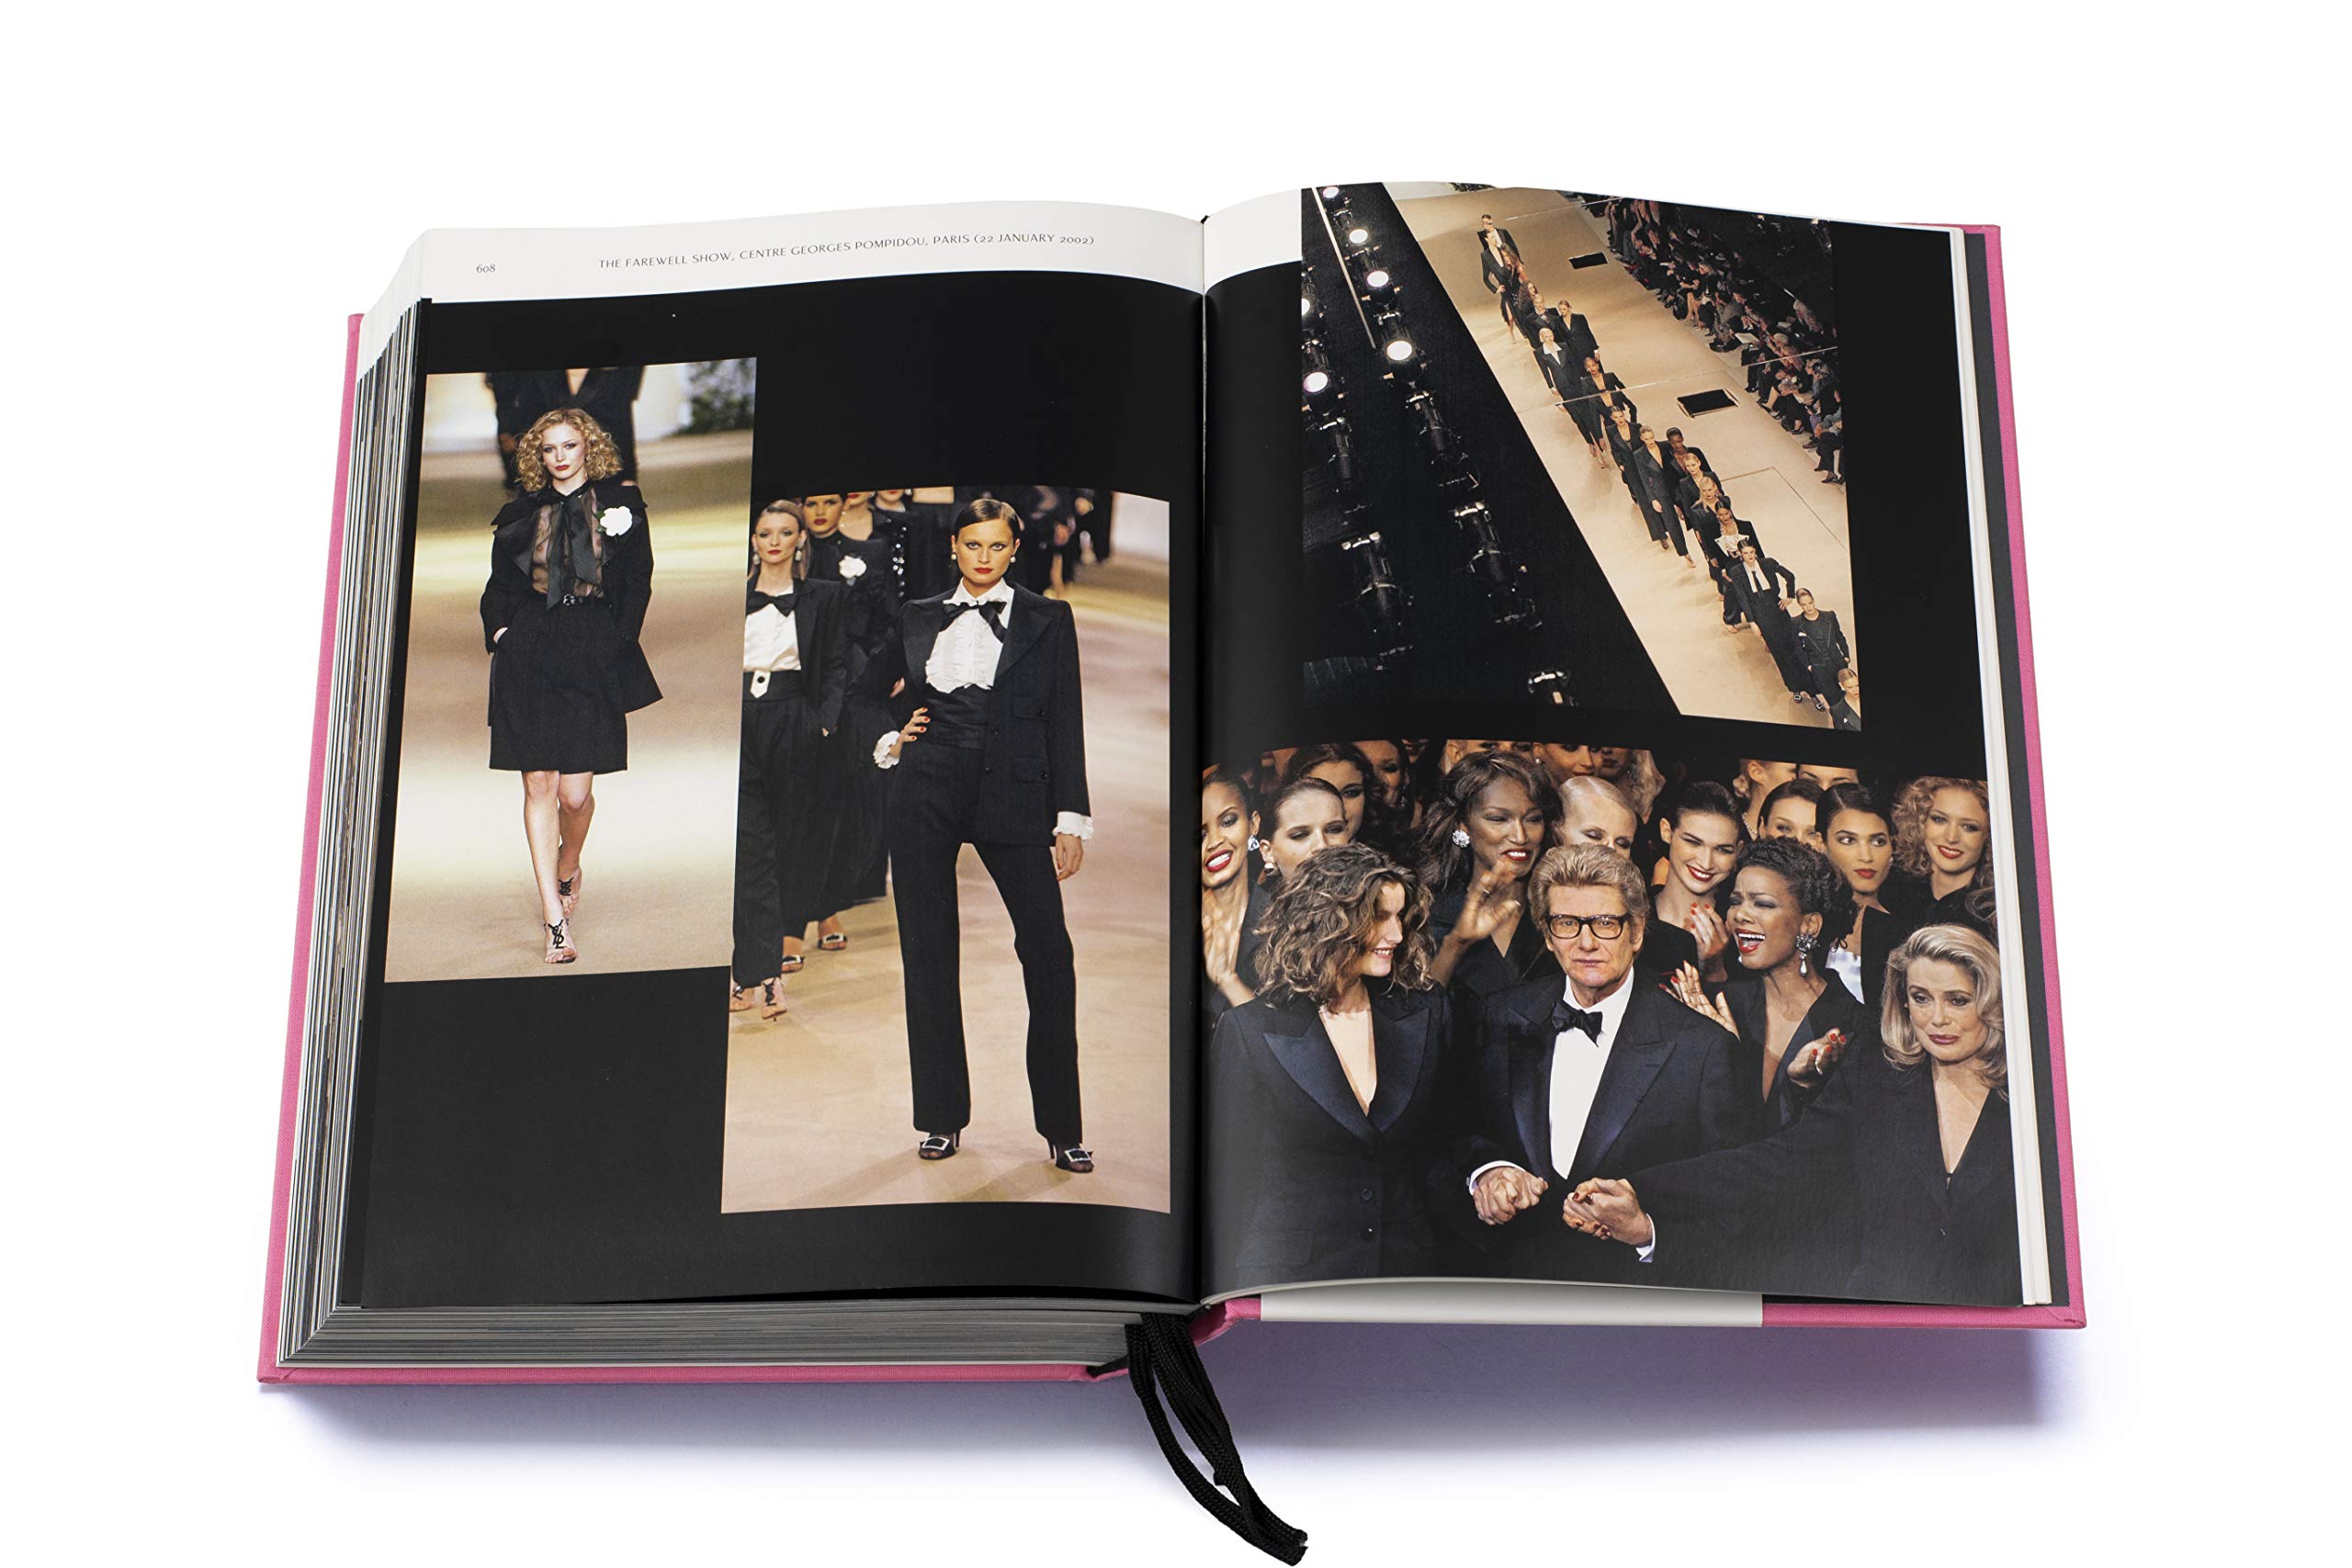 Yves Saint Laurent Catwalk: The Complete Haute Couture Collections